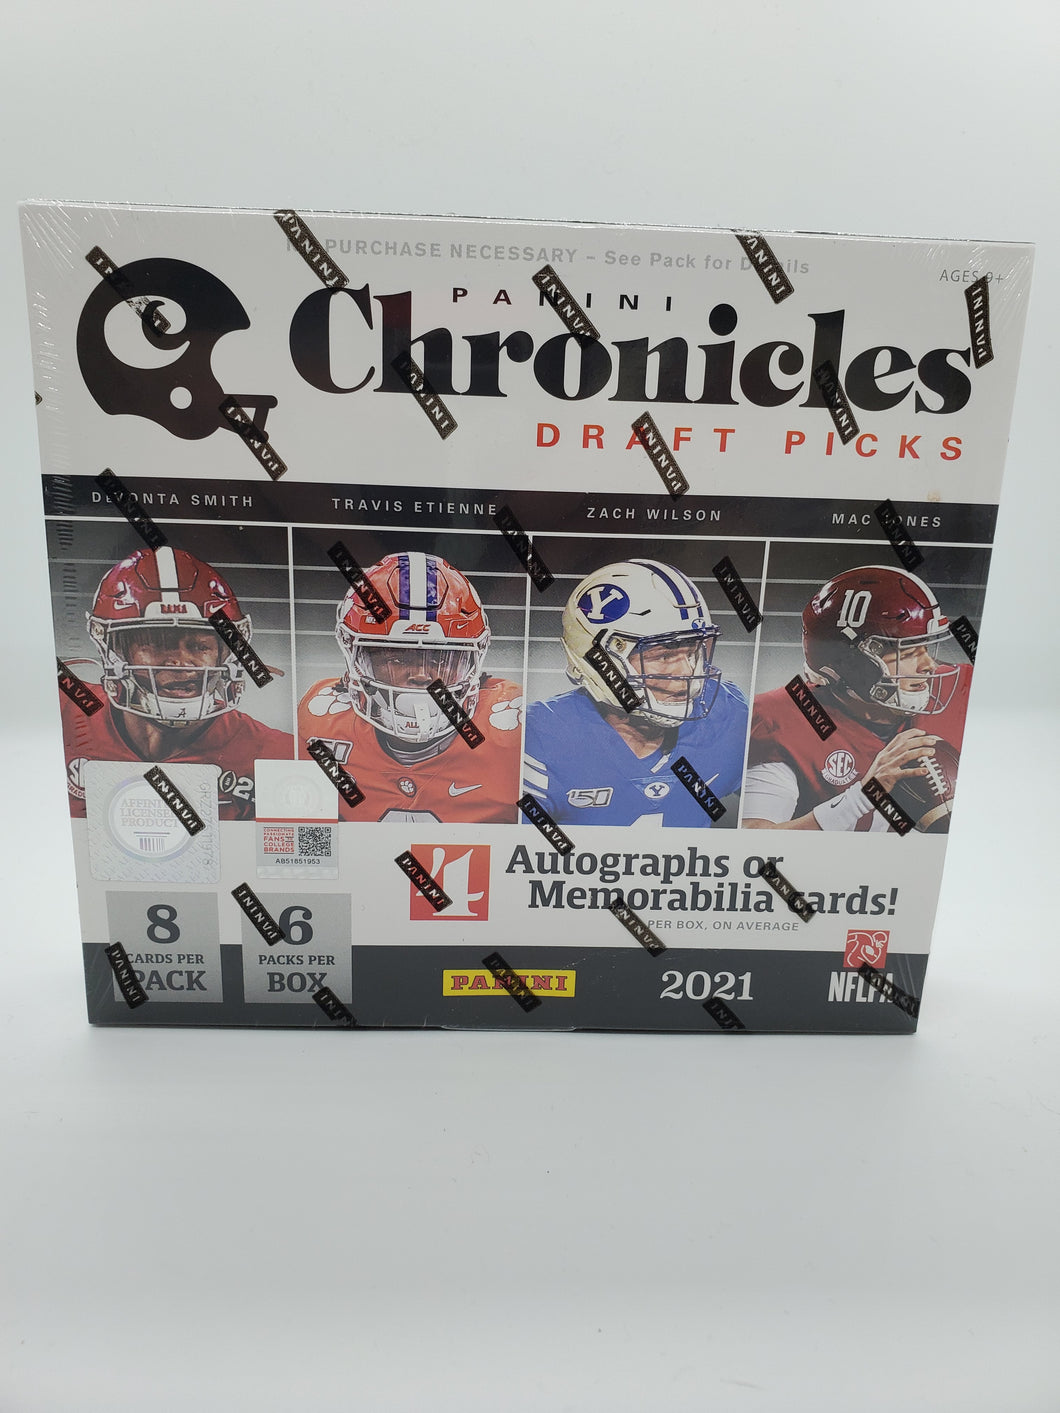 PANINI CHRONICLES DRAFT PICKS 2021 ONE PACK FROM HOBBY BOX (8 CARDS) x1